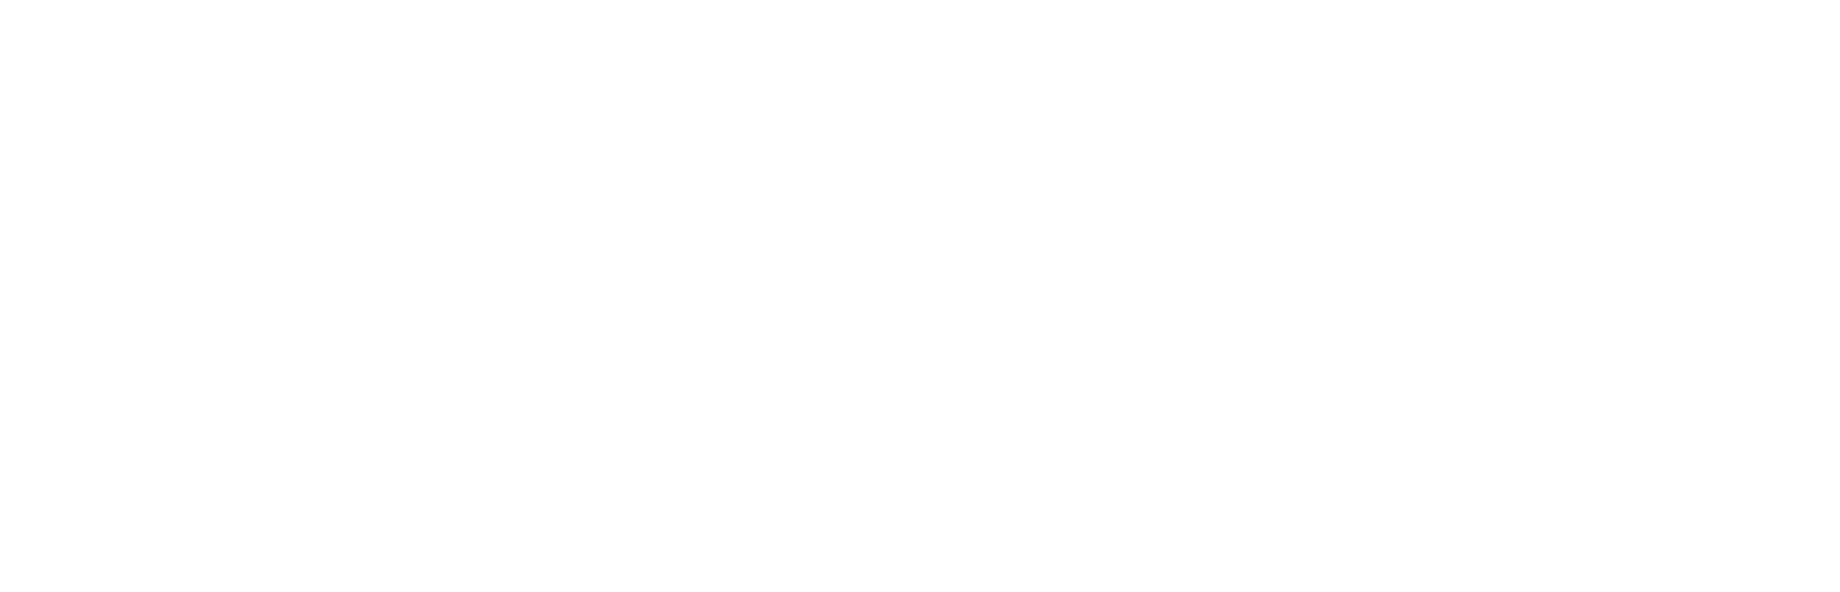 Axis Football 2023 for Nintendo Switch - Nintendo Official Site